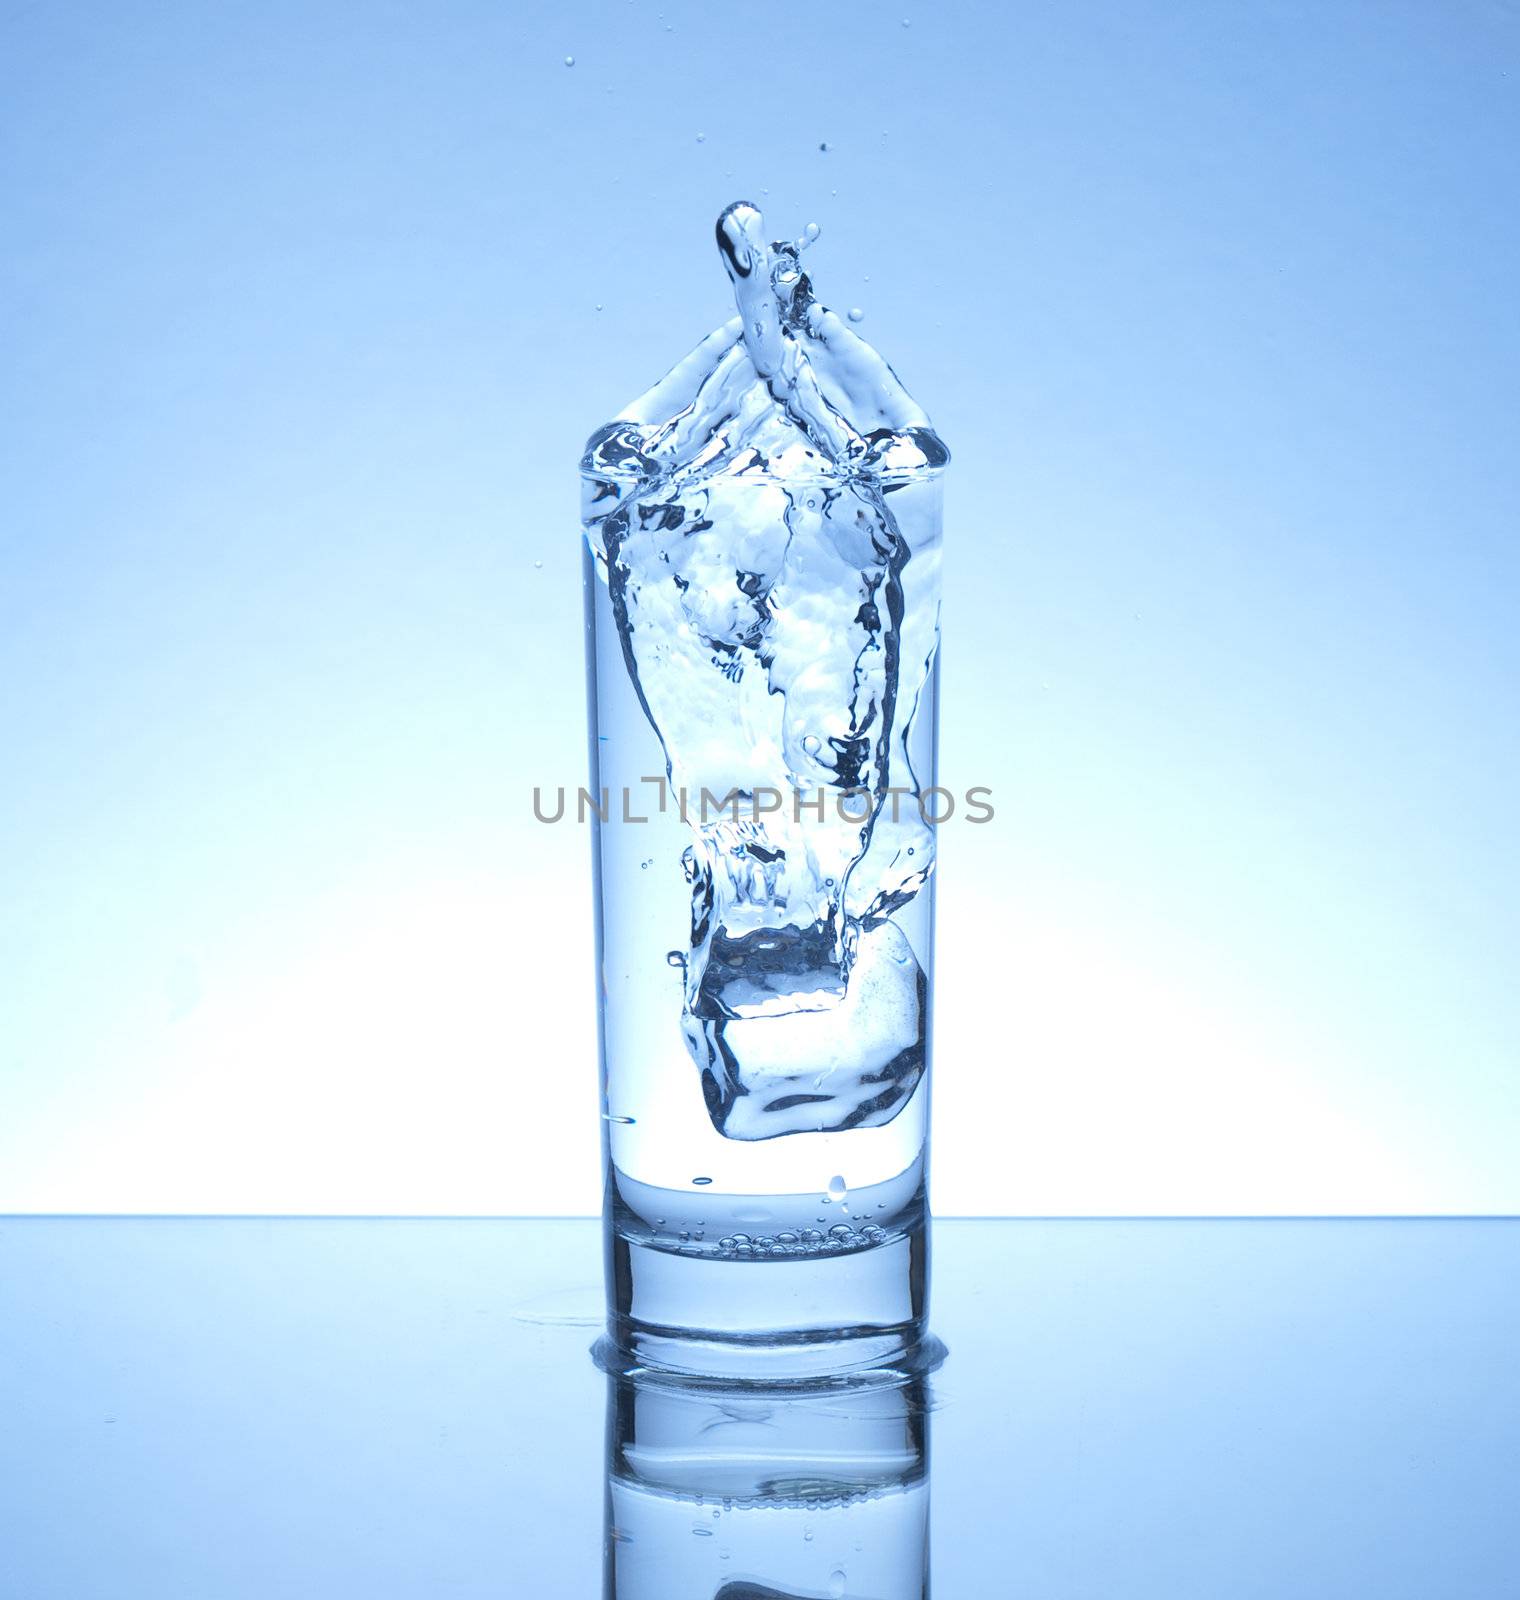 Ice cube dropped in a glass of water